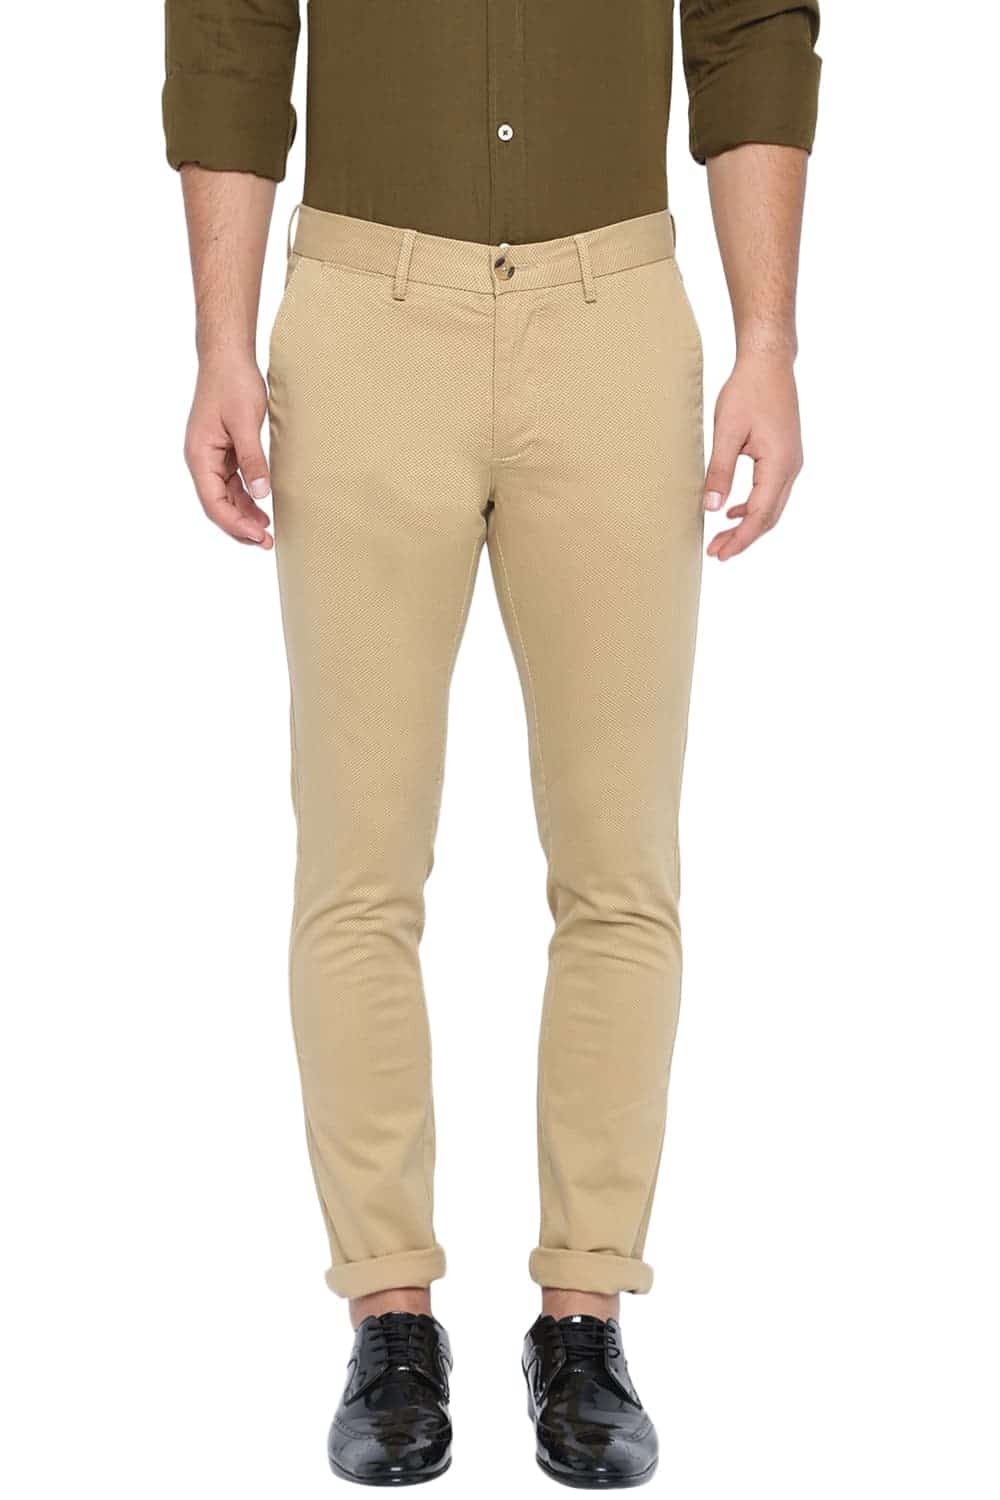 BASICS | Basics Tapered Fit Taos Taupe Stretch Trouser